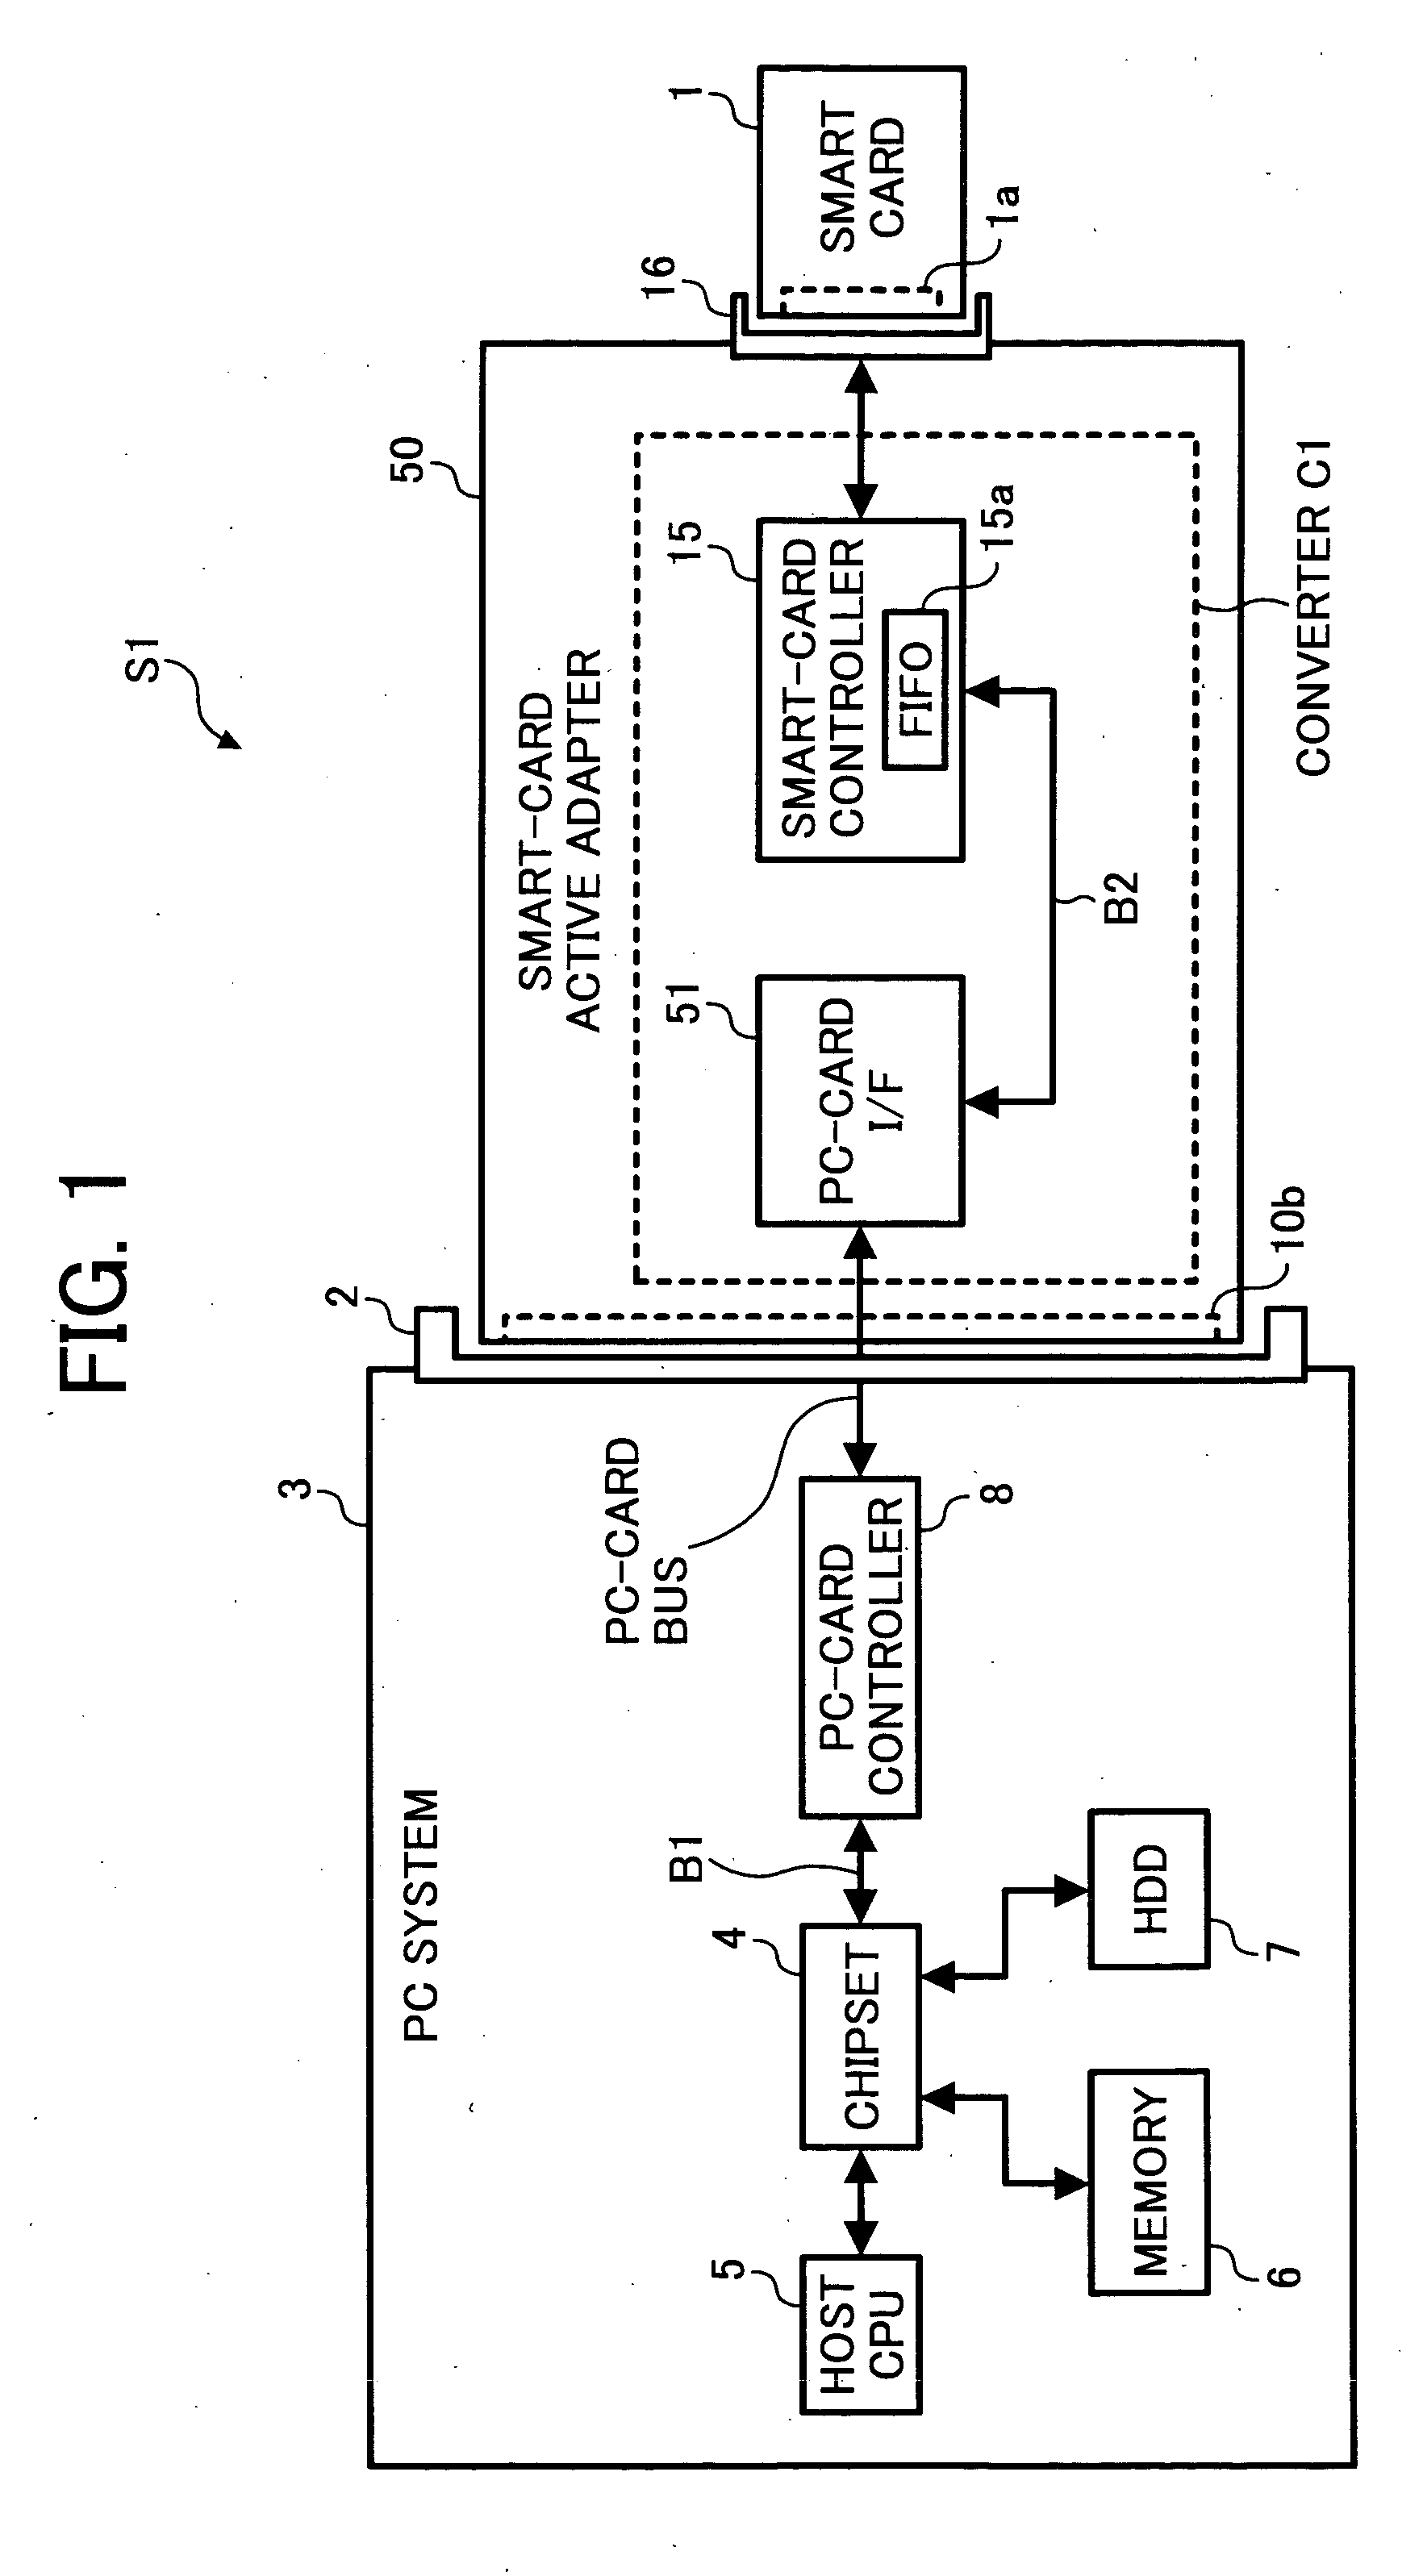 Card recognition system for recognizing standard card and non-standard card